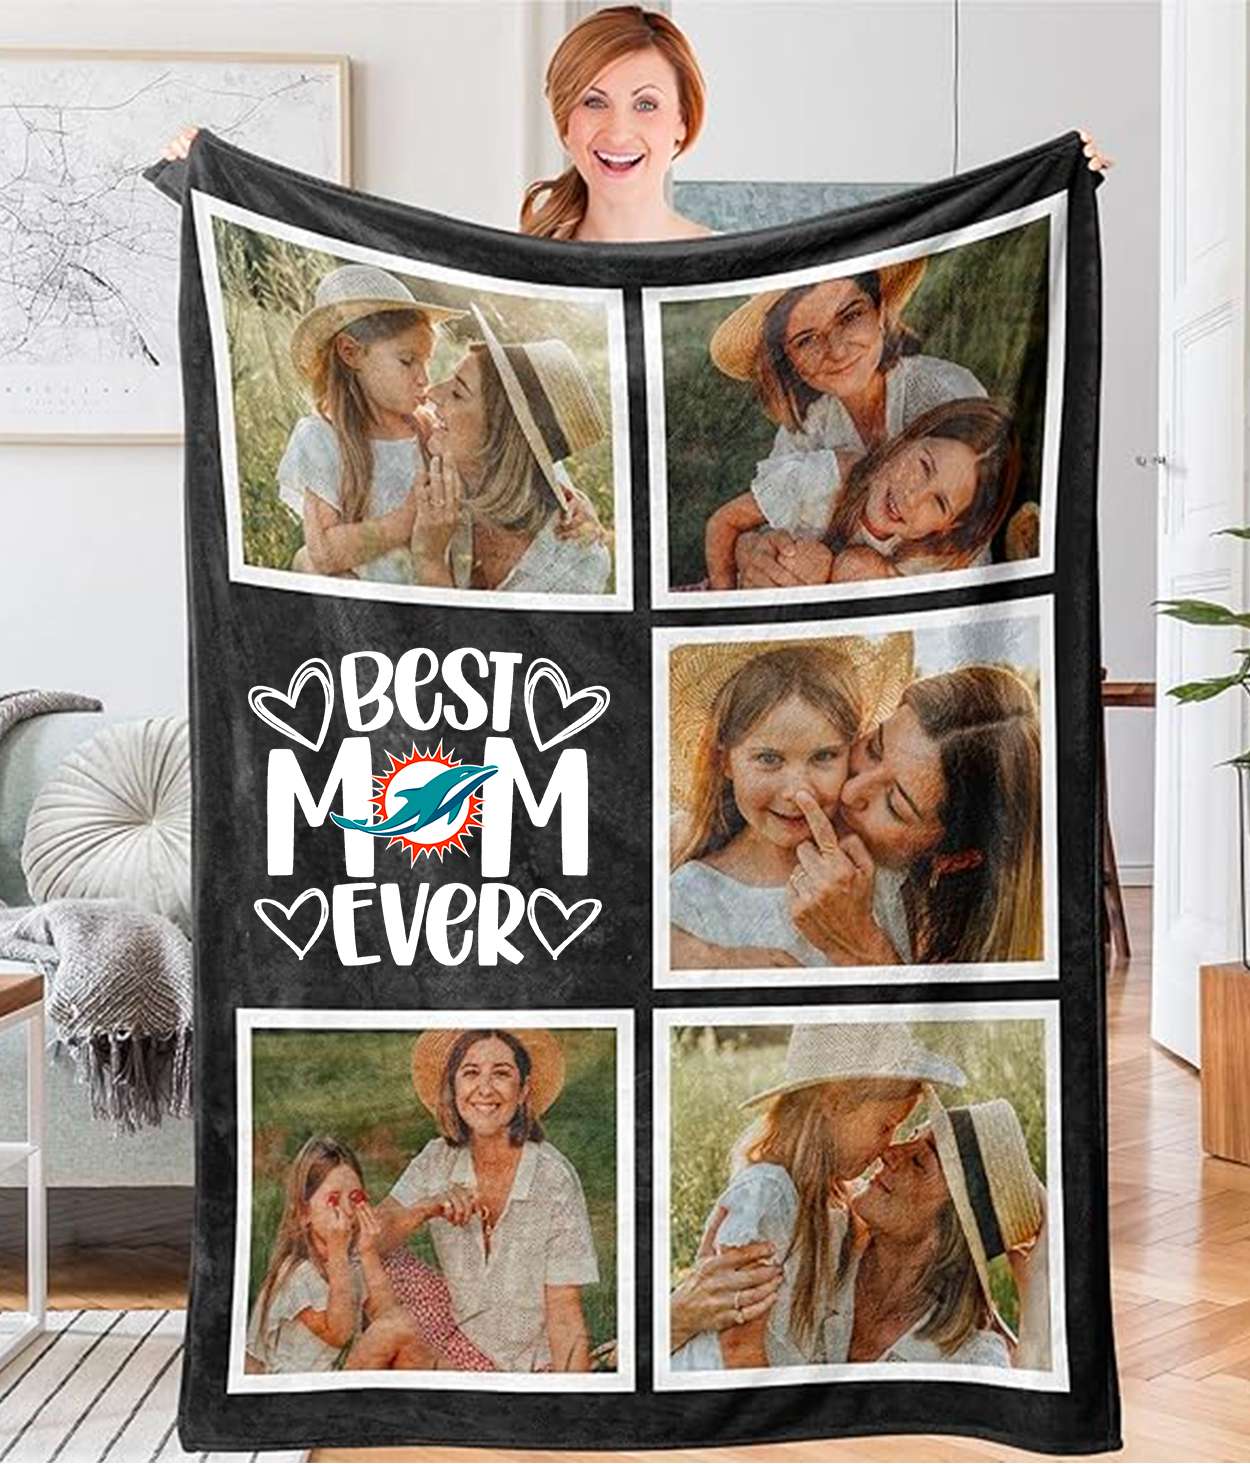 Best Mom Ever - Custom NFL Miami Dolphins Blankets with Pictures for Mother's Day Gift